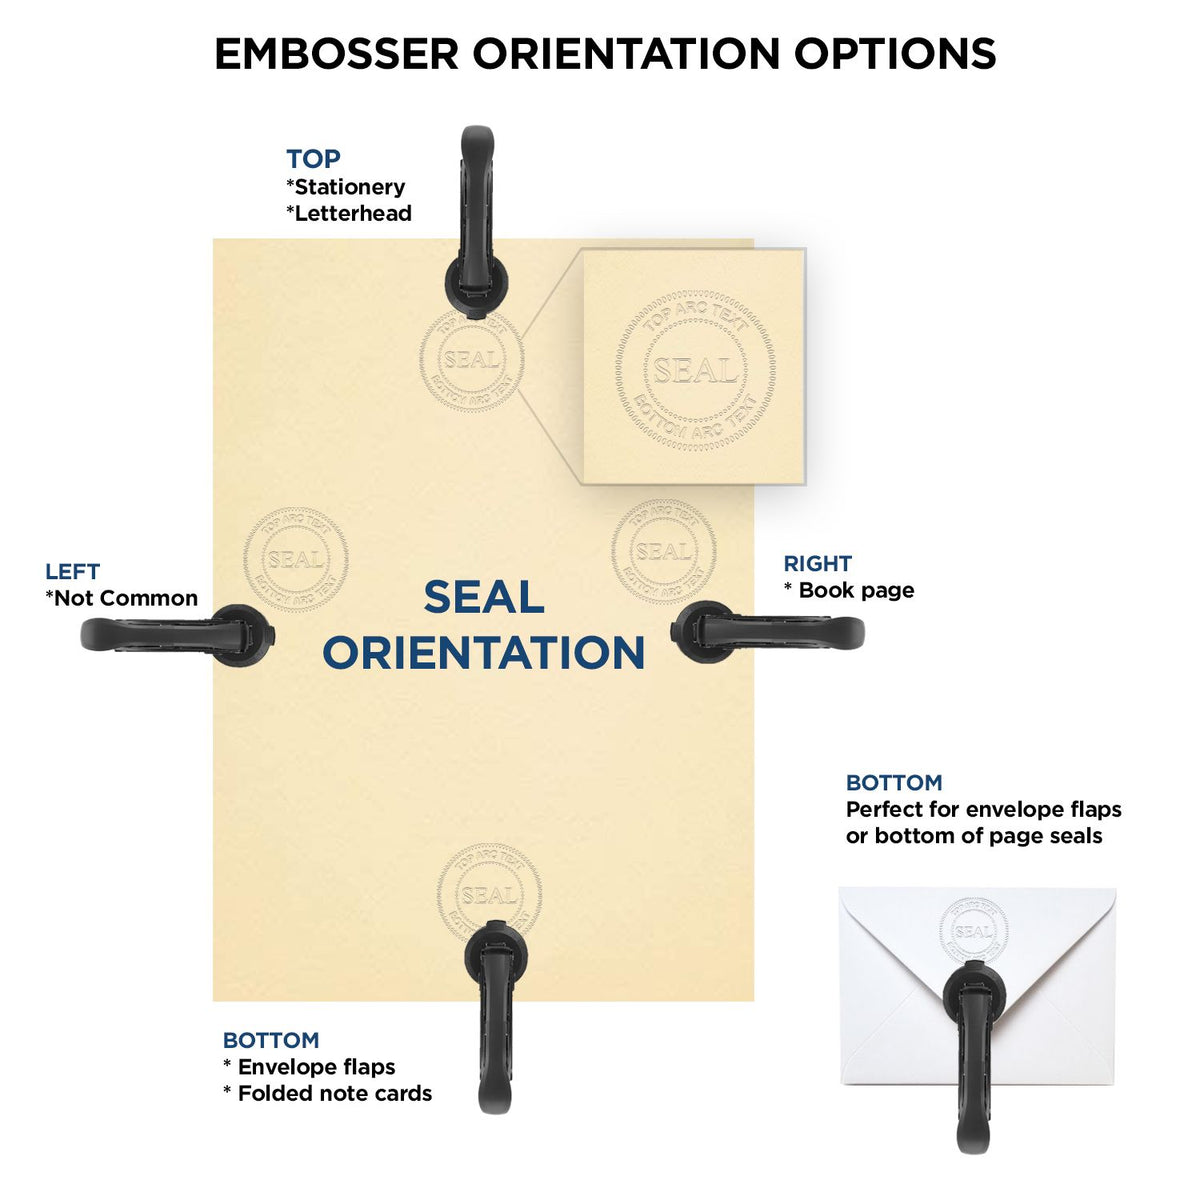 An infographic for the Gift Mississippi Architect Seal showing embosser orientation, this is showing examples of a top, bottom, right and left insert.